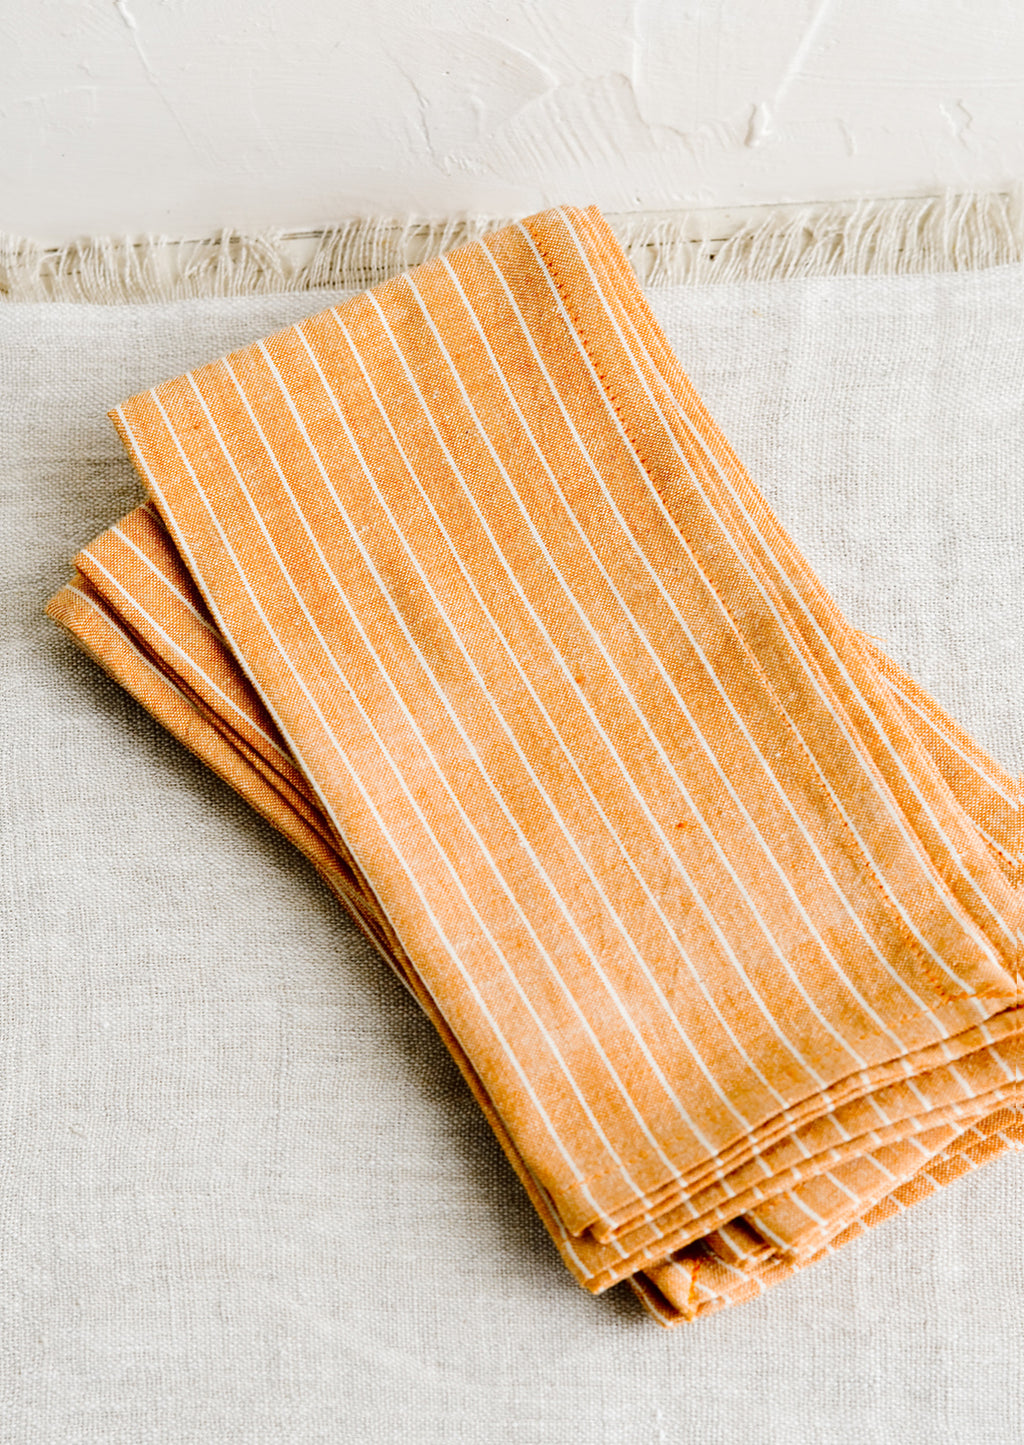 1: Folded fabric napkins in a pile featuring orange and white pinstripe pattern.